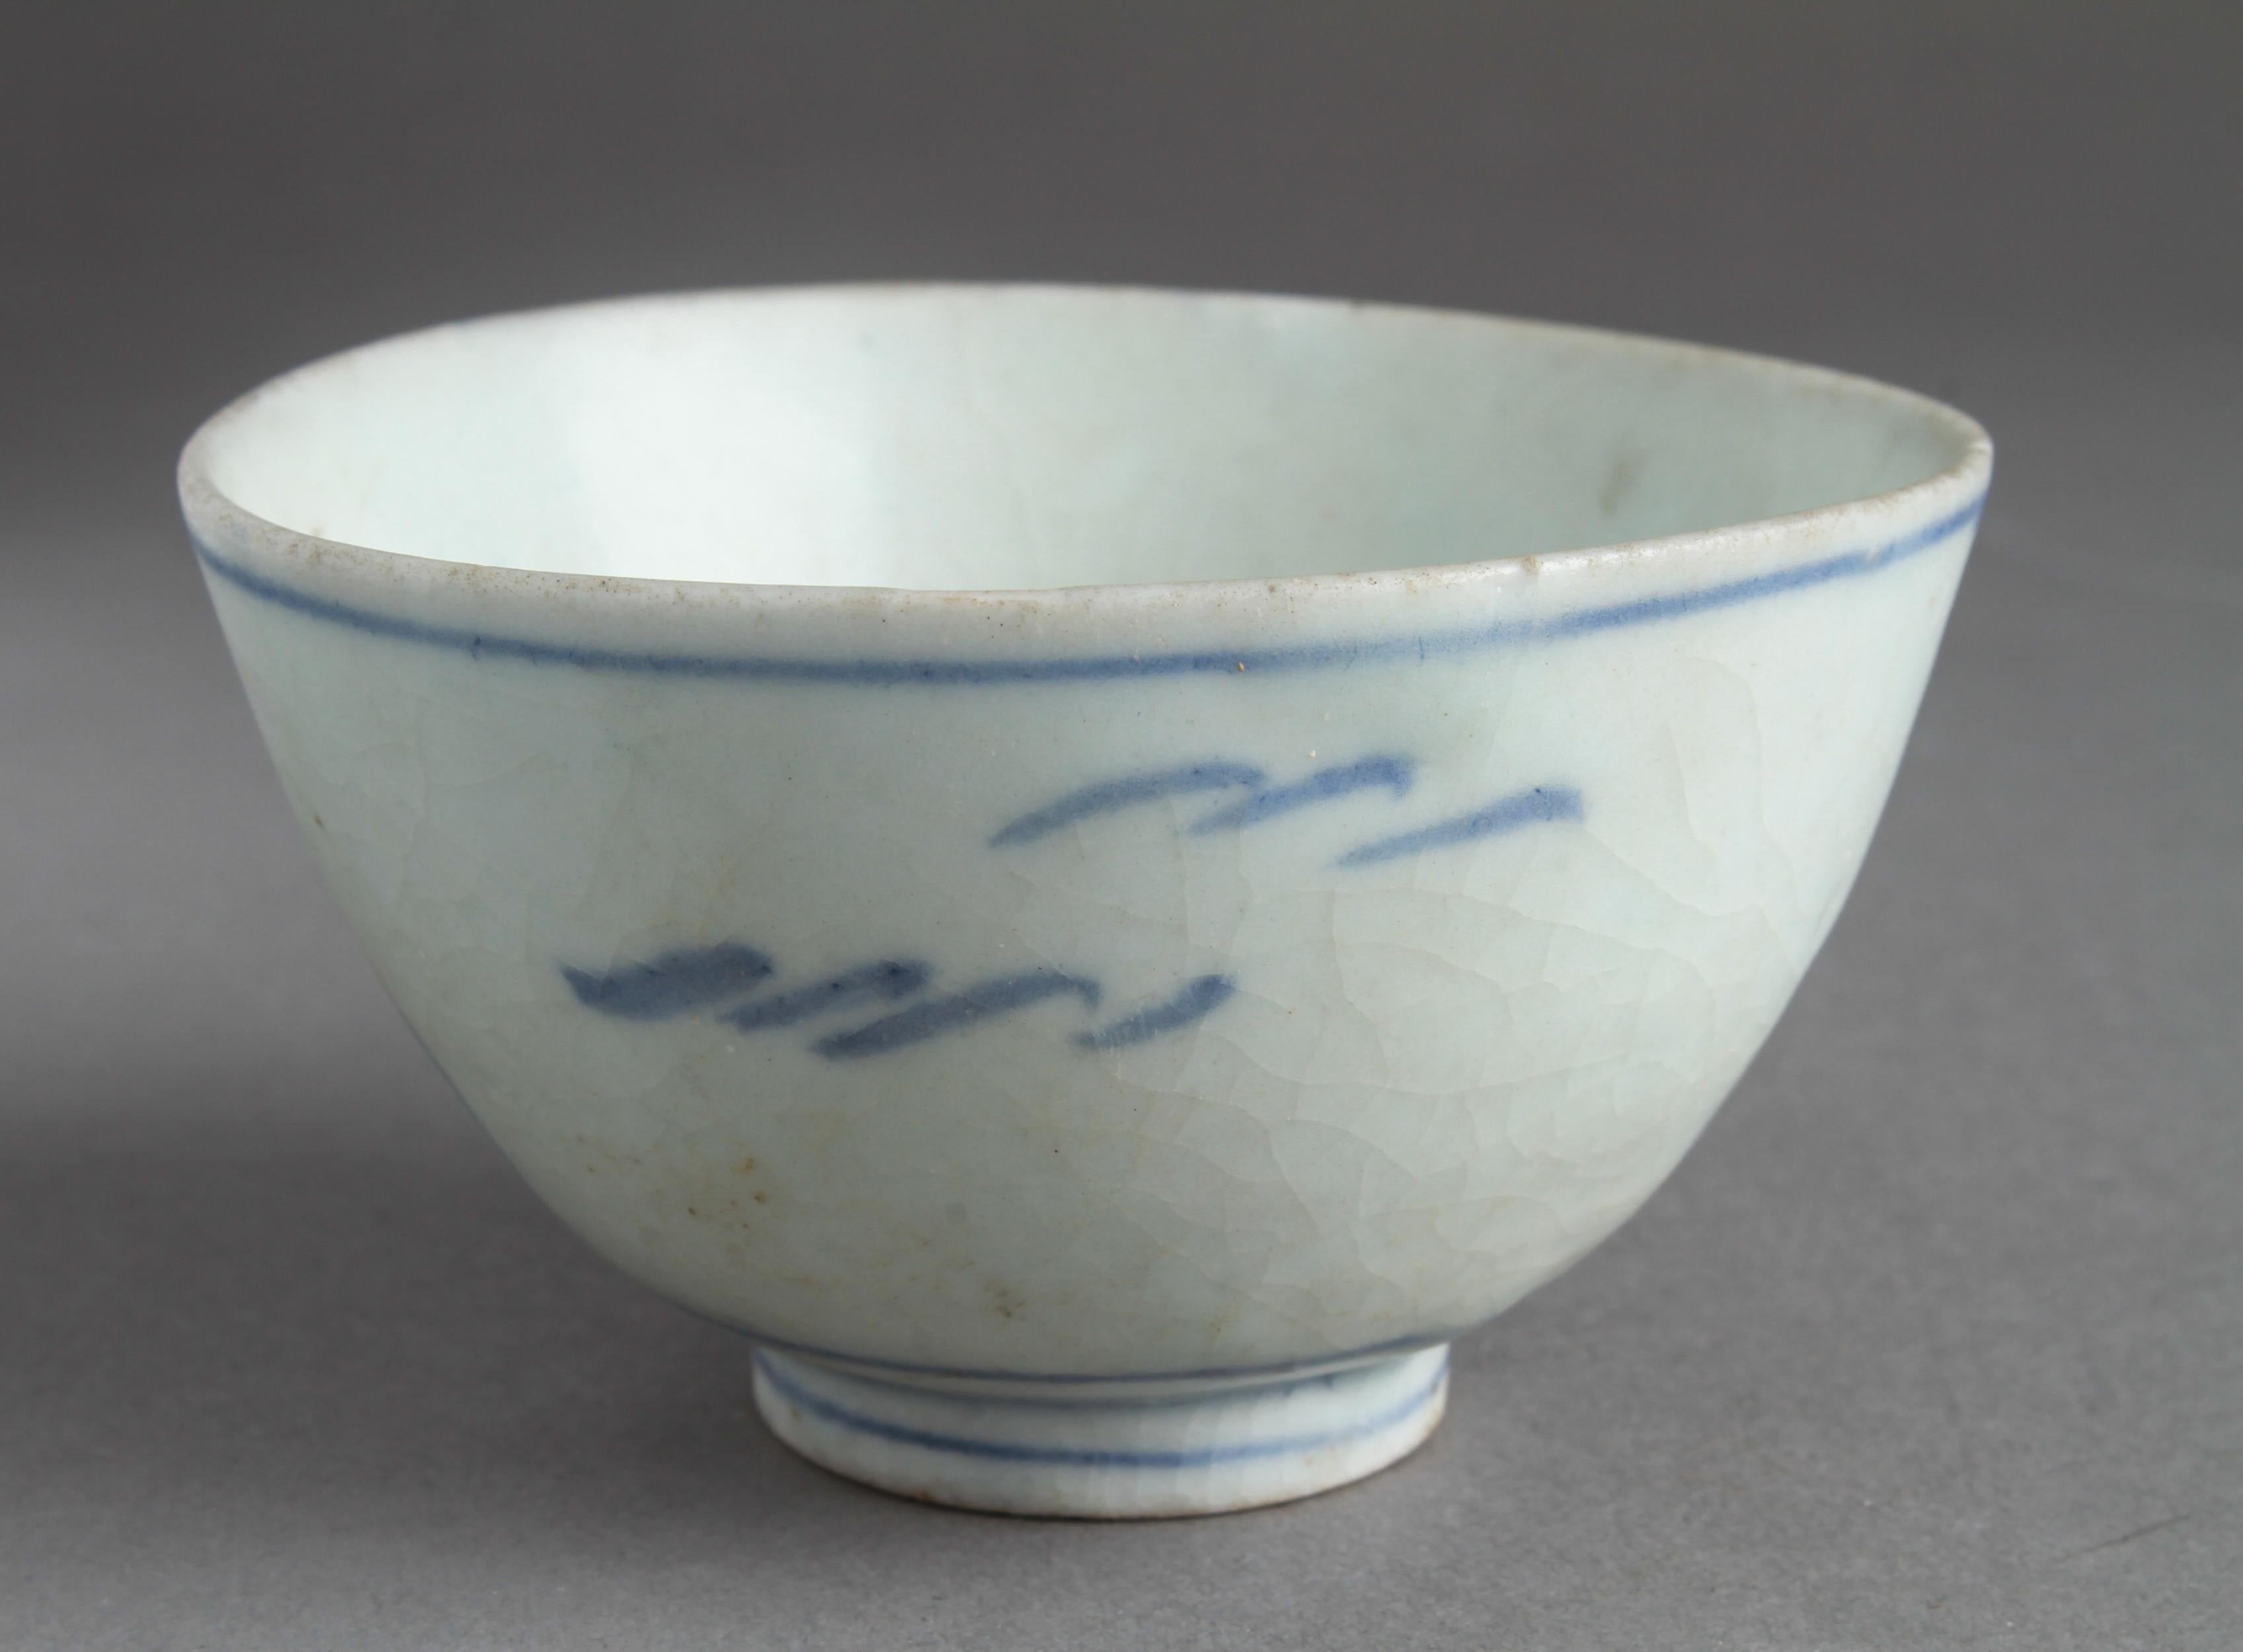 Chinese export porcelain blue and white teacup, possibly from the Nanking cargo auction, Christie’s, 1986. Measures: 2